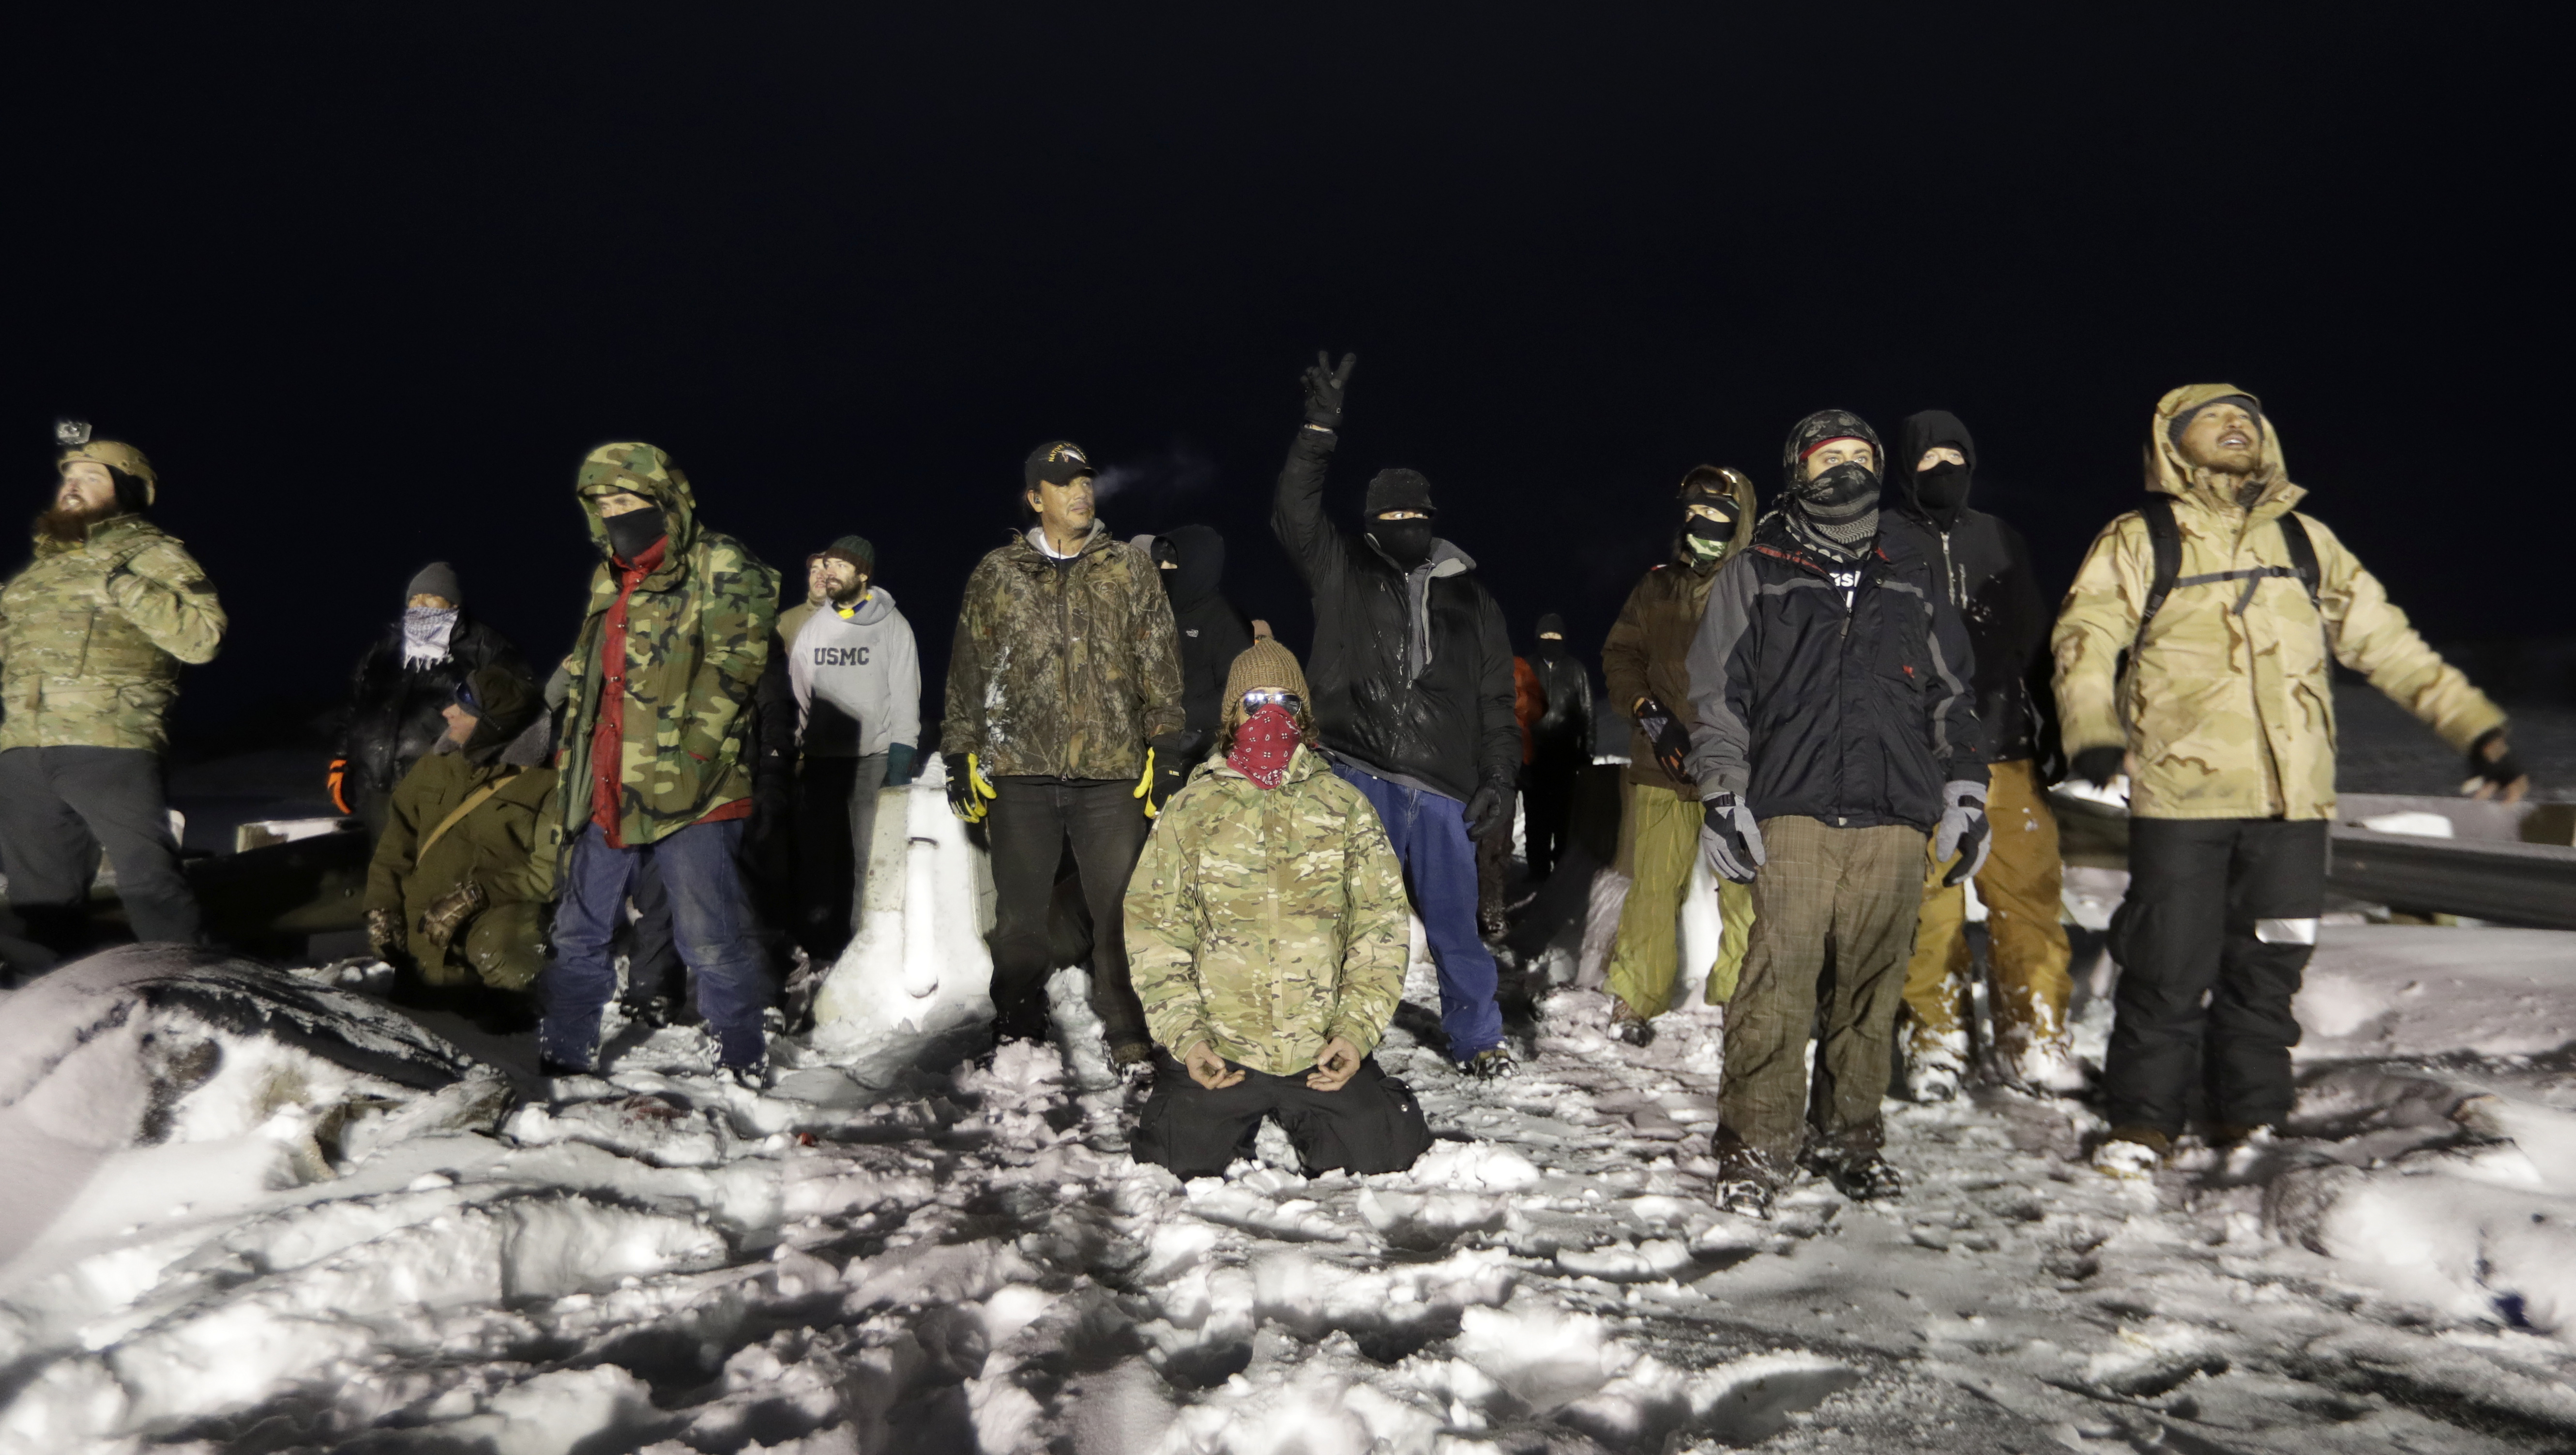 Military veterans stand on a closed bridge to protest across from police protecting the Dakota Access oil pipeline site in Cannon Ball, N.D., Thursday, Dec. 1, 2016. (AP Photo/David Goldman)